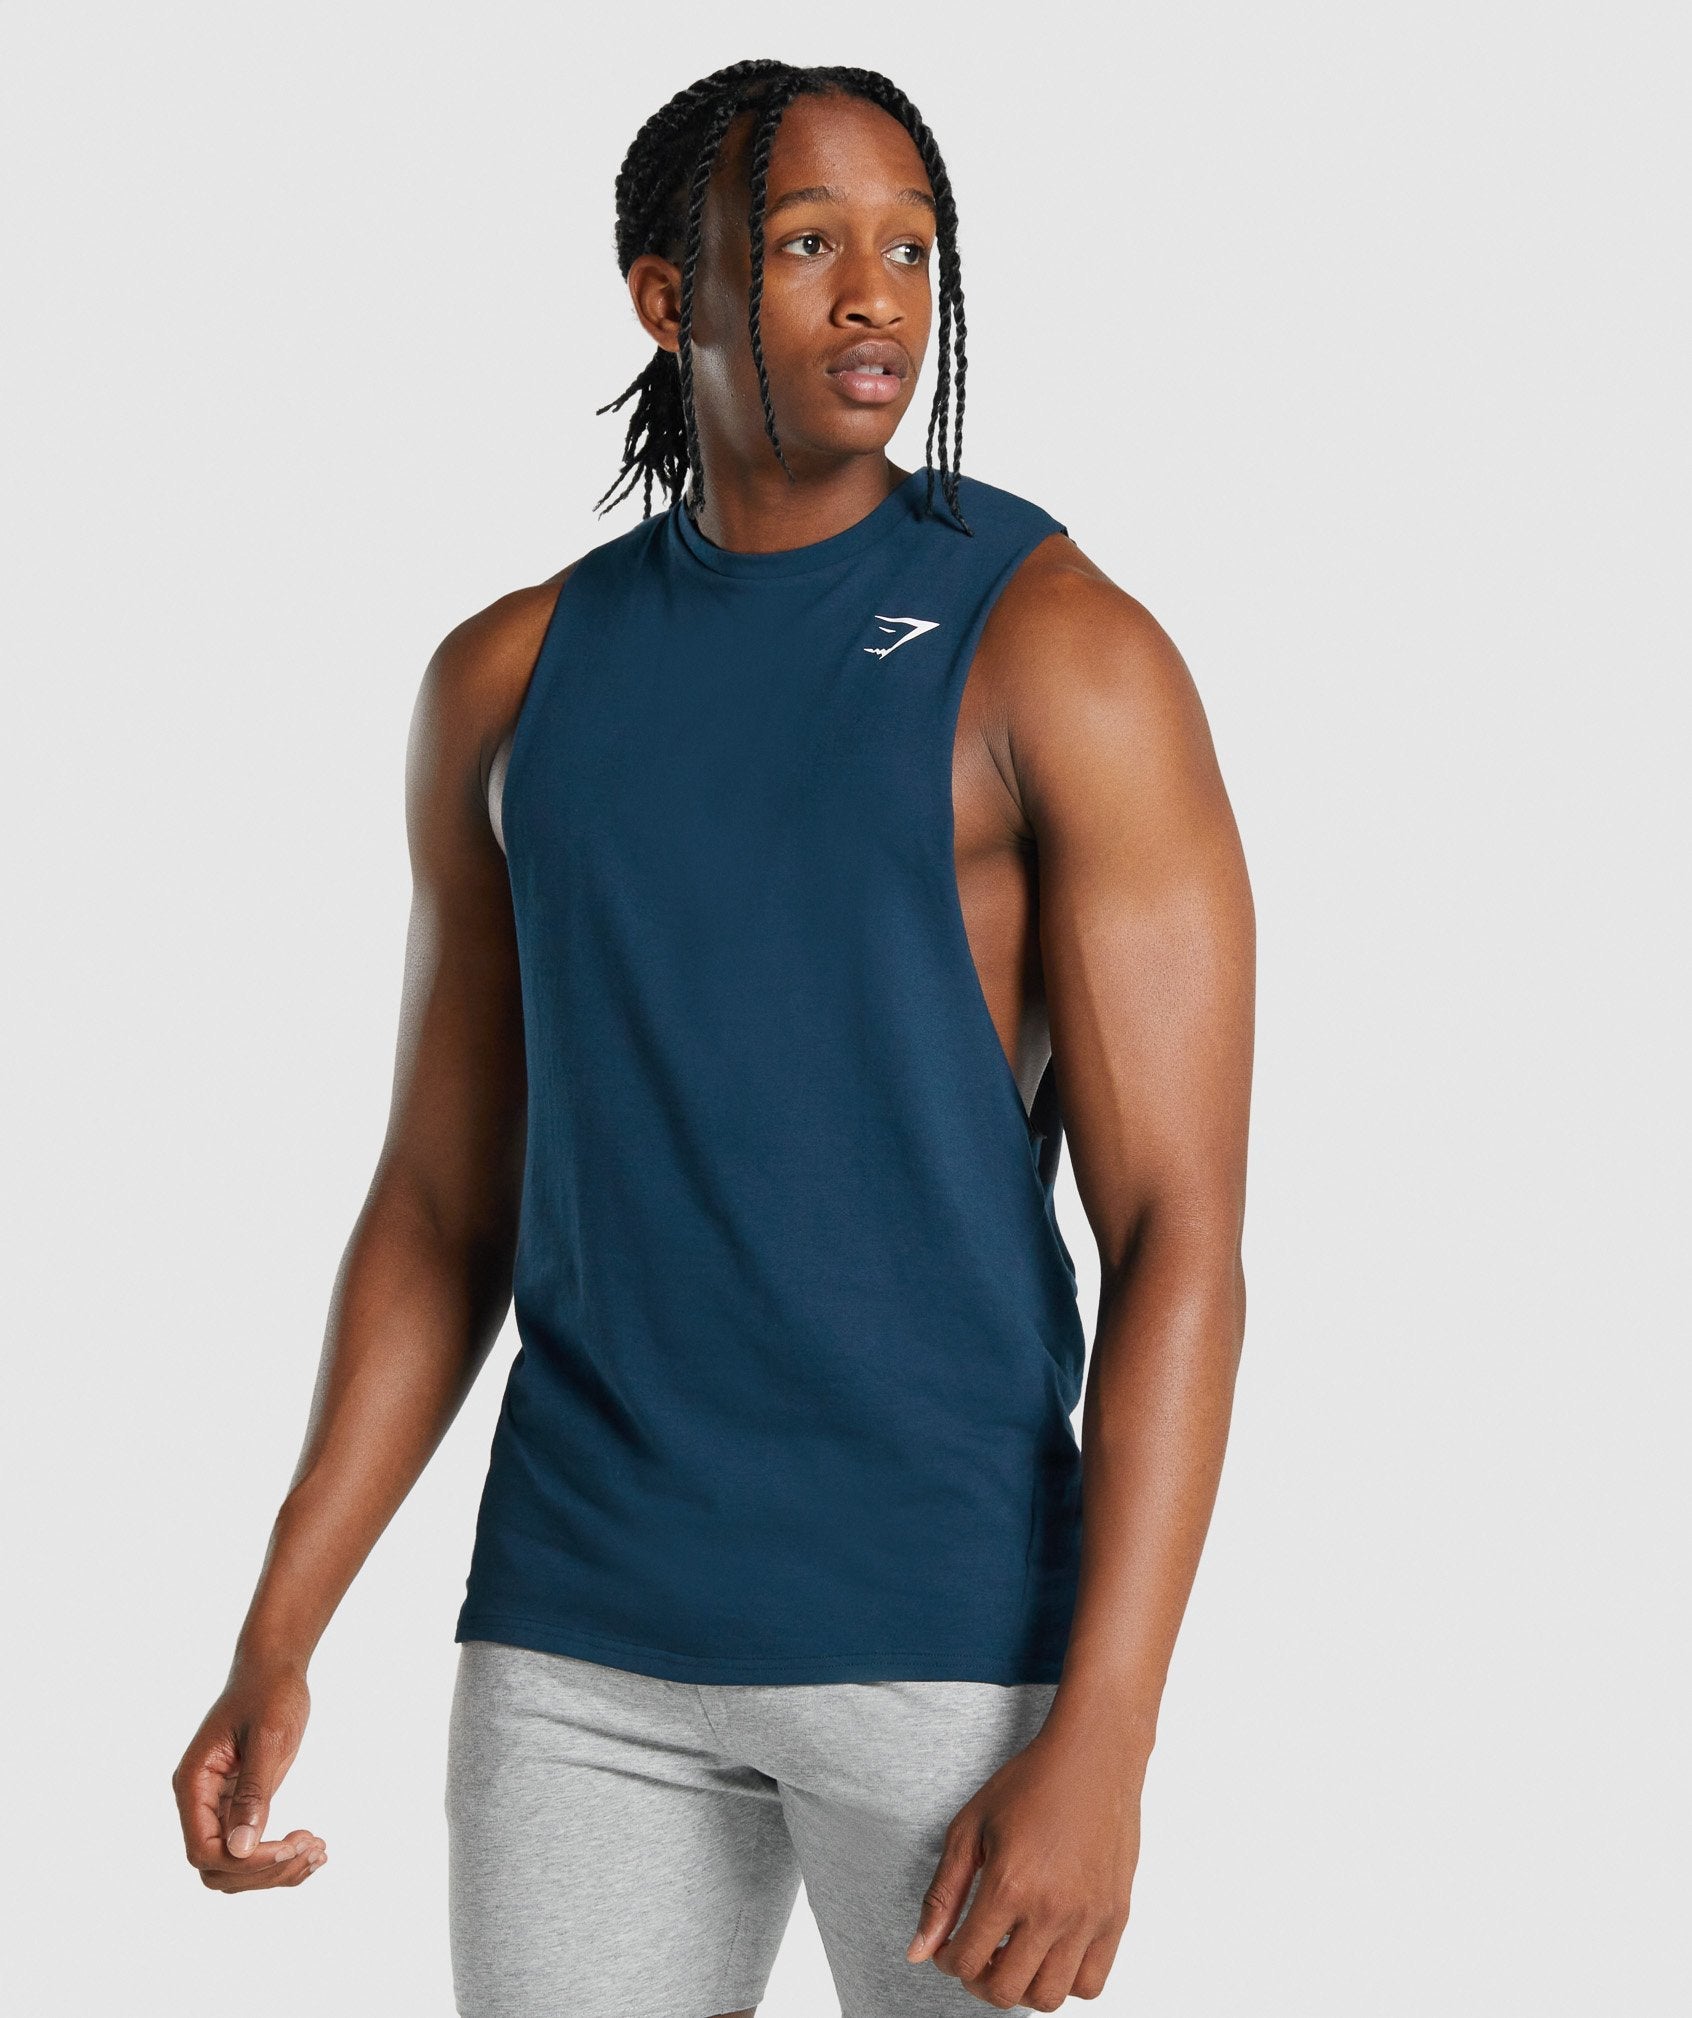 Critical Drop Arm Tank in Navy is out of stock